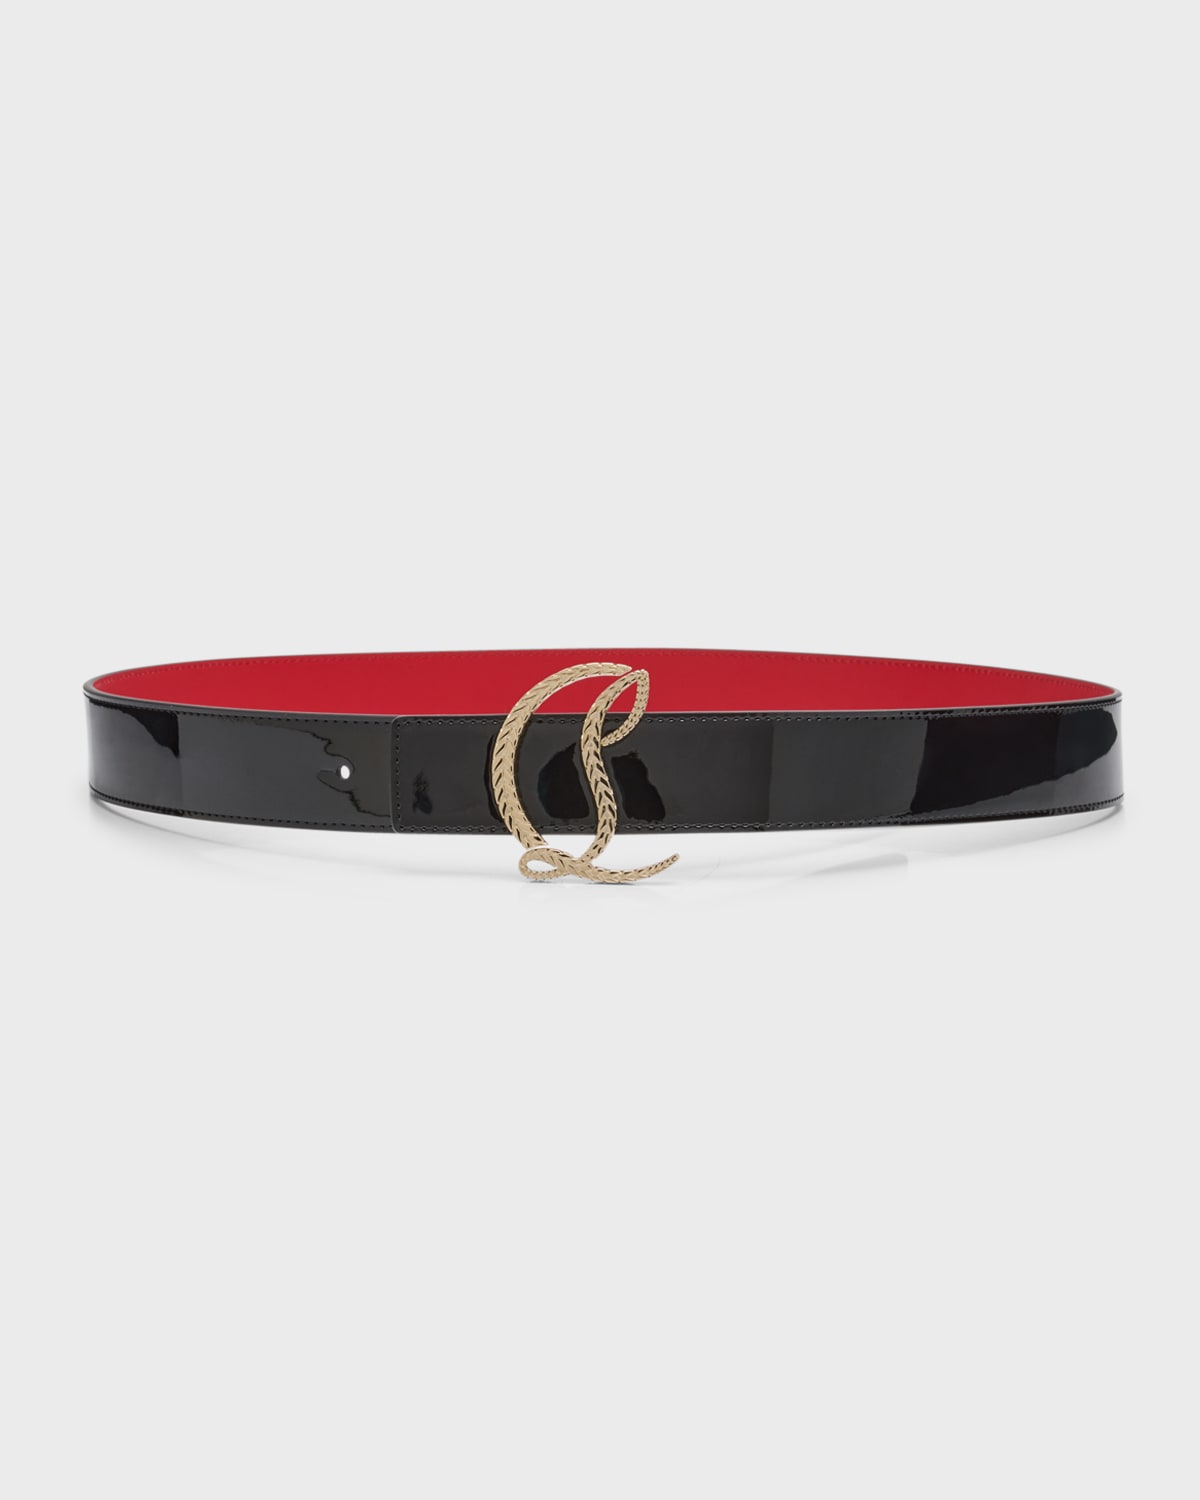 CL Logo Belt in Patent Leather